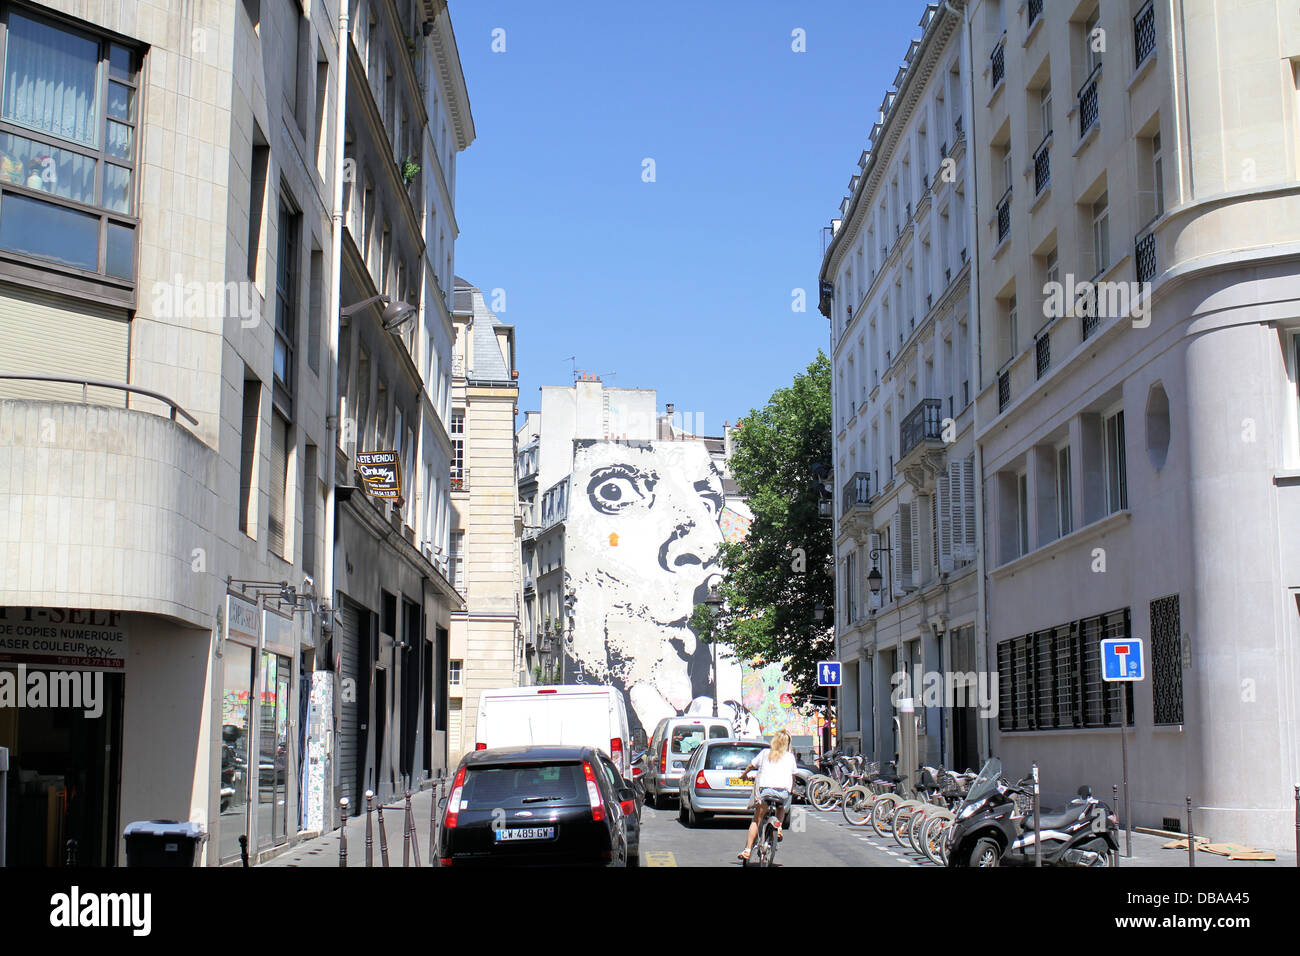 A view westwards down Rue du Cloitre Saint-Merri, looking at a large mural on a building Stock Photo